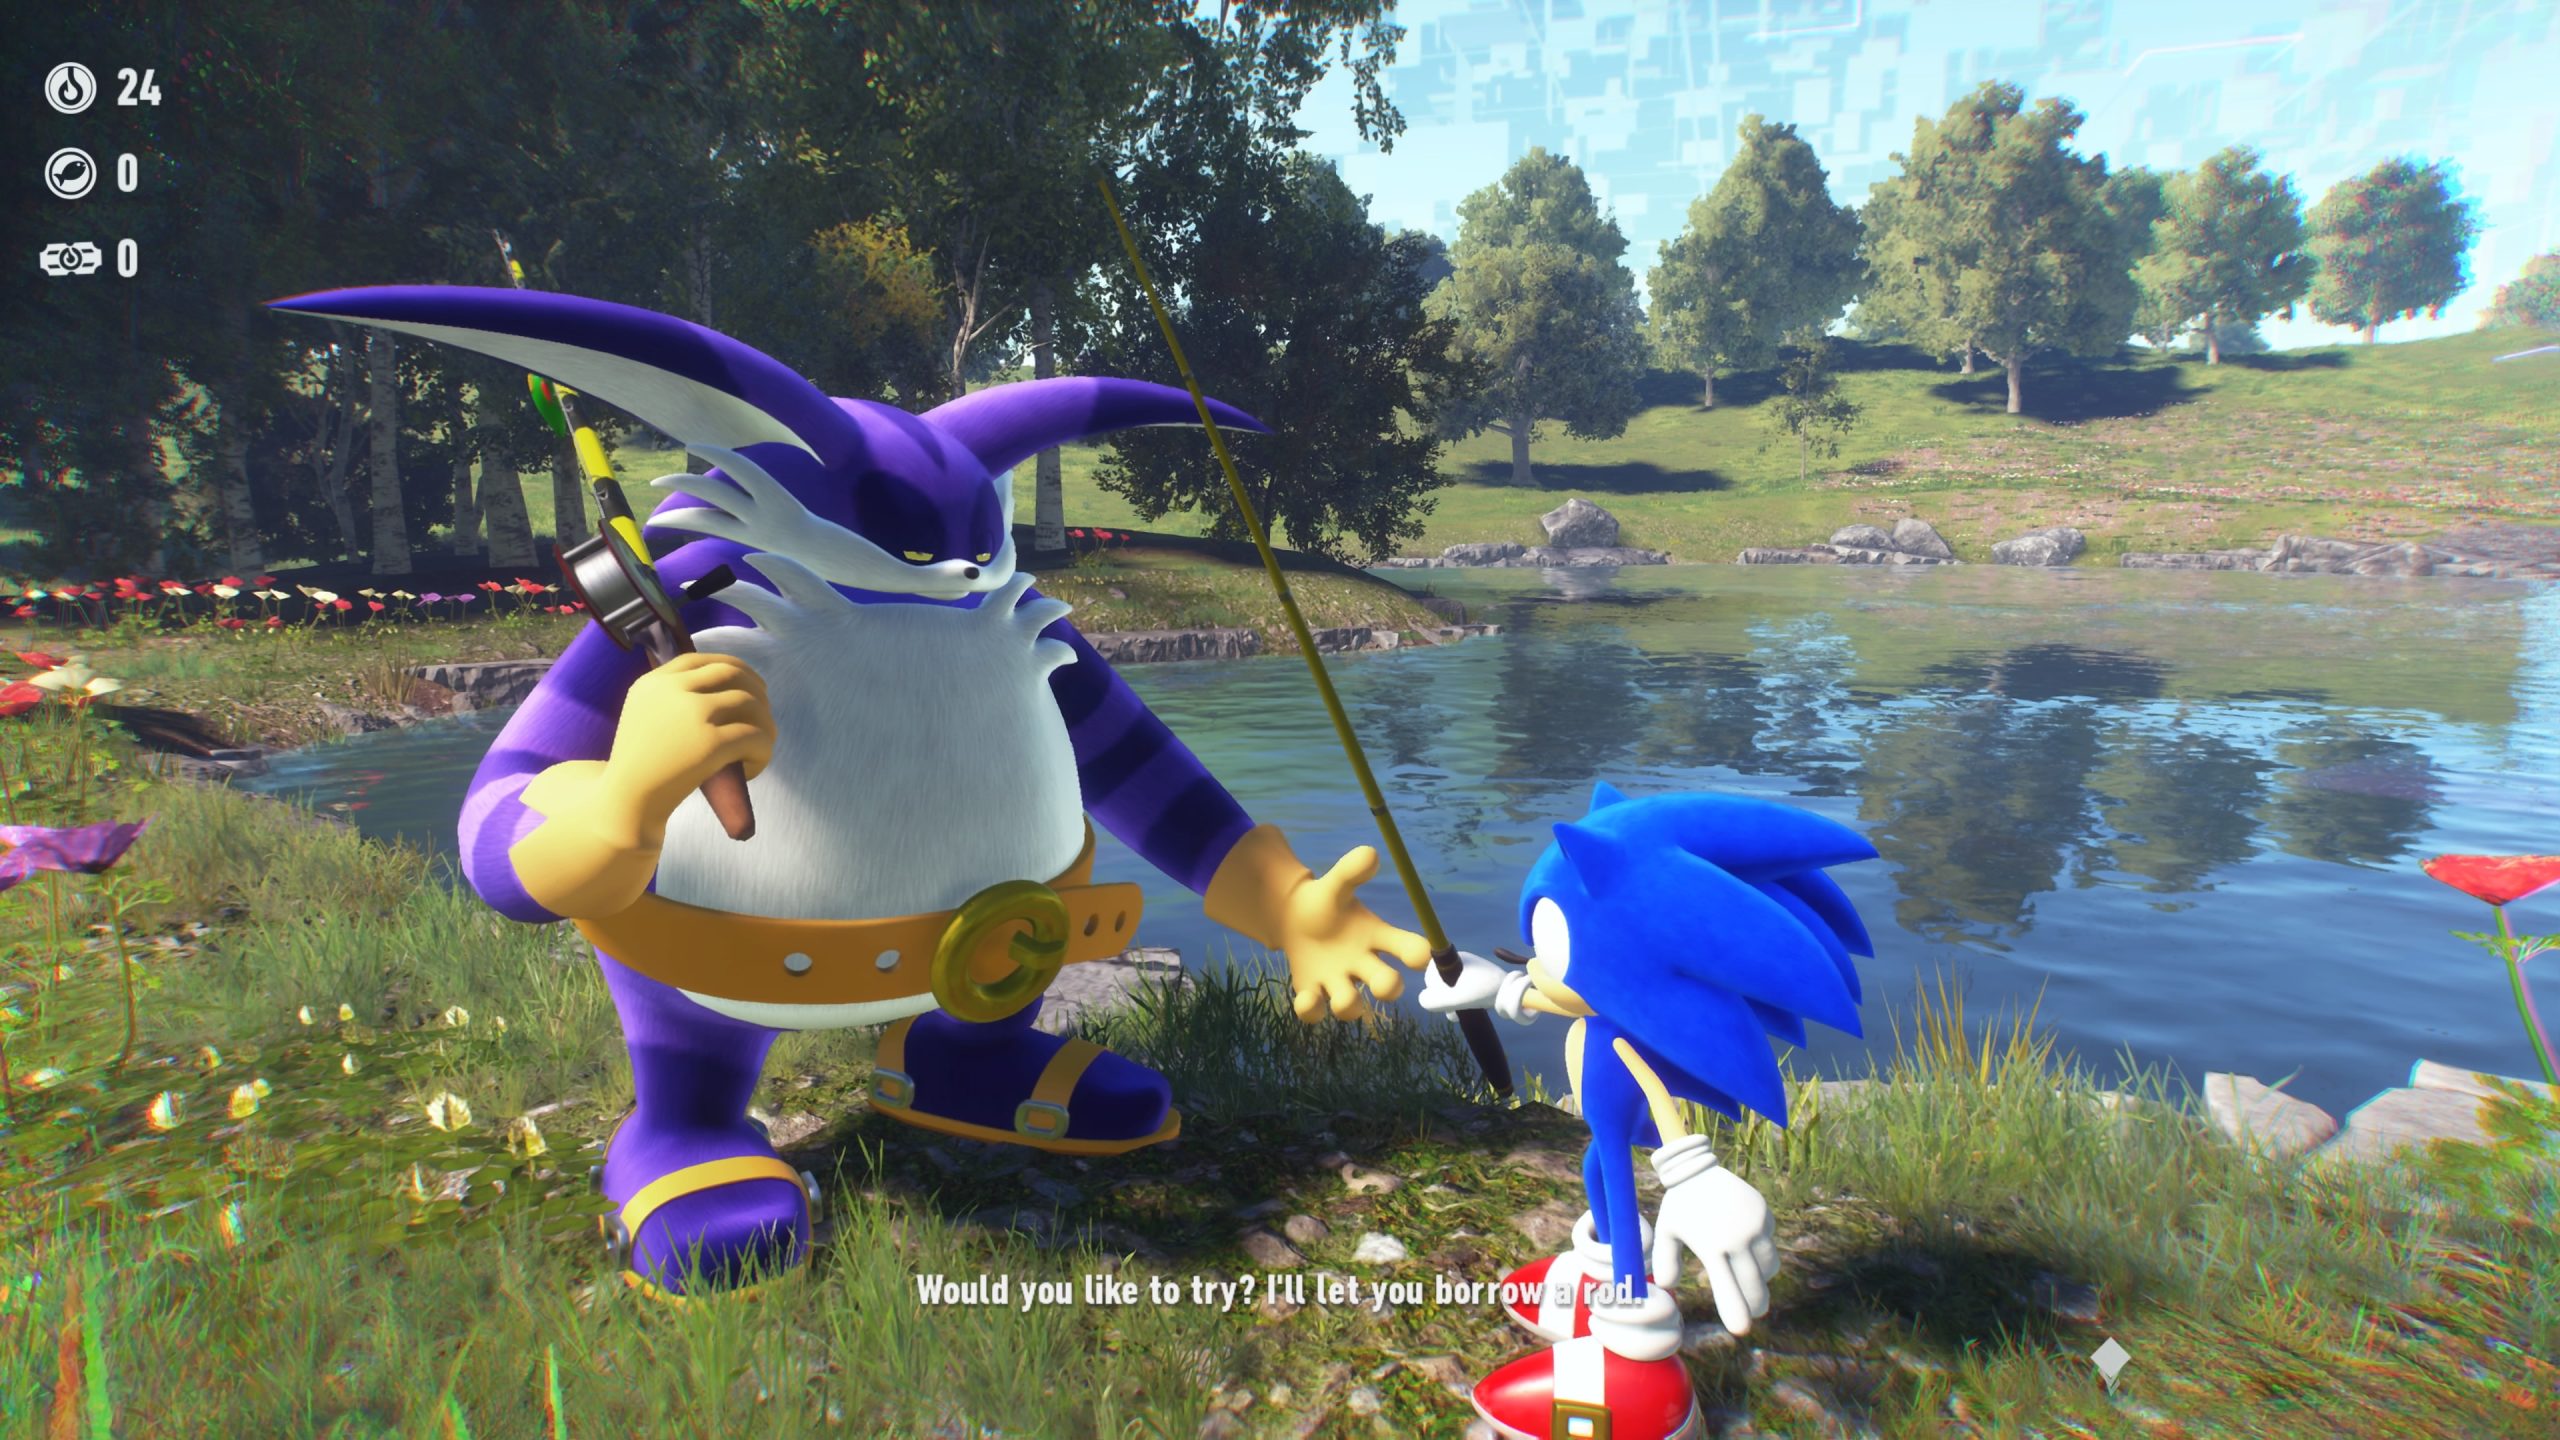 Sonamy moments/interactions in Sonic Boom Part 4 